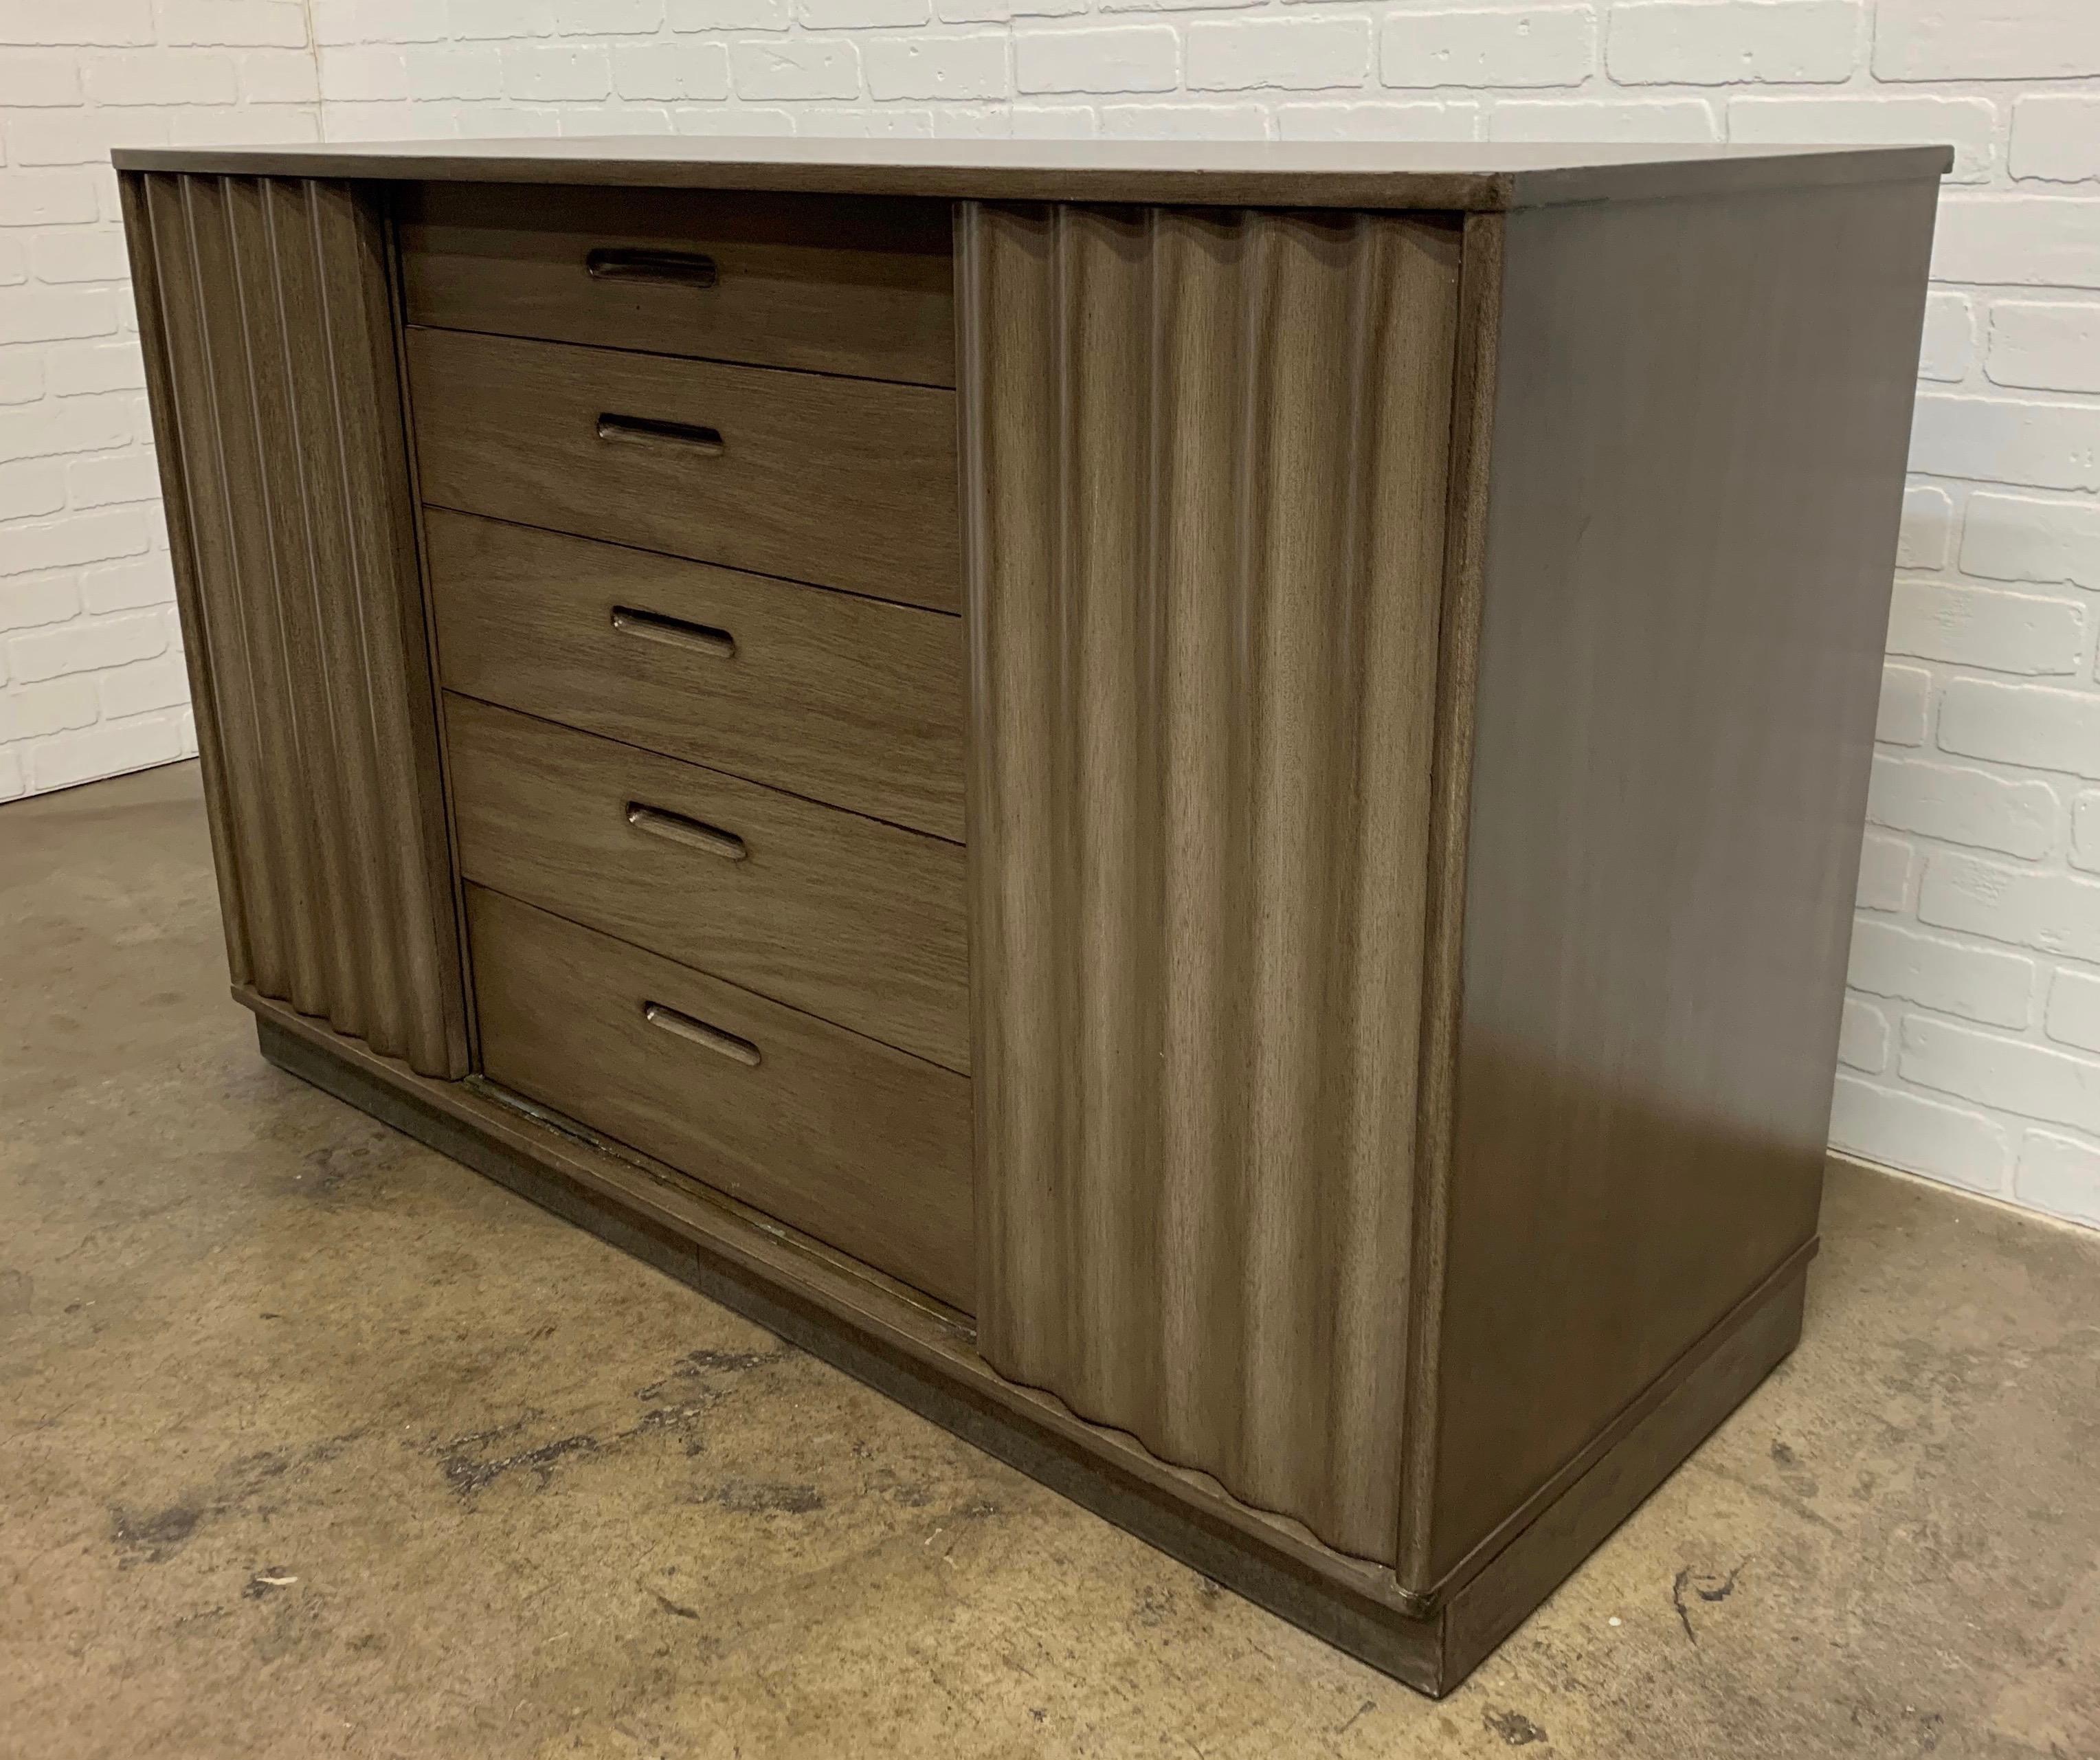 Two Edward Wormley cabinets with corrugated wood sliding doors and center drawer section in a grey brown finish
Each cabinet is 20